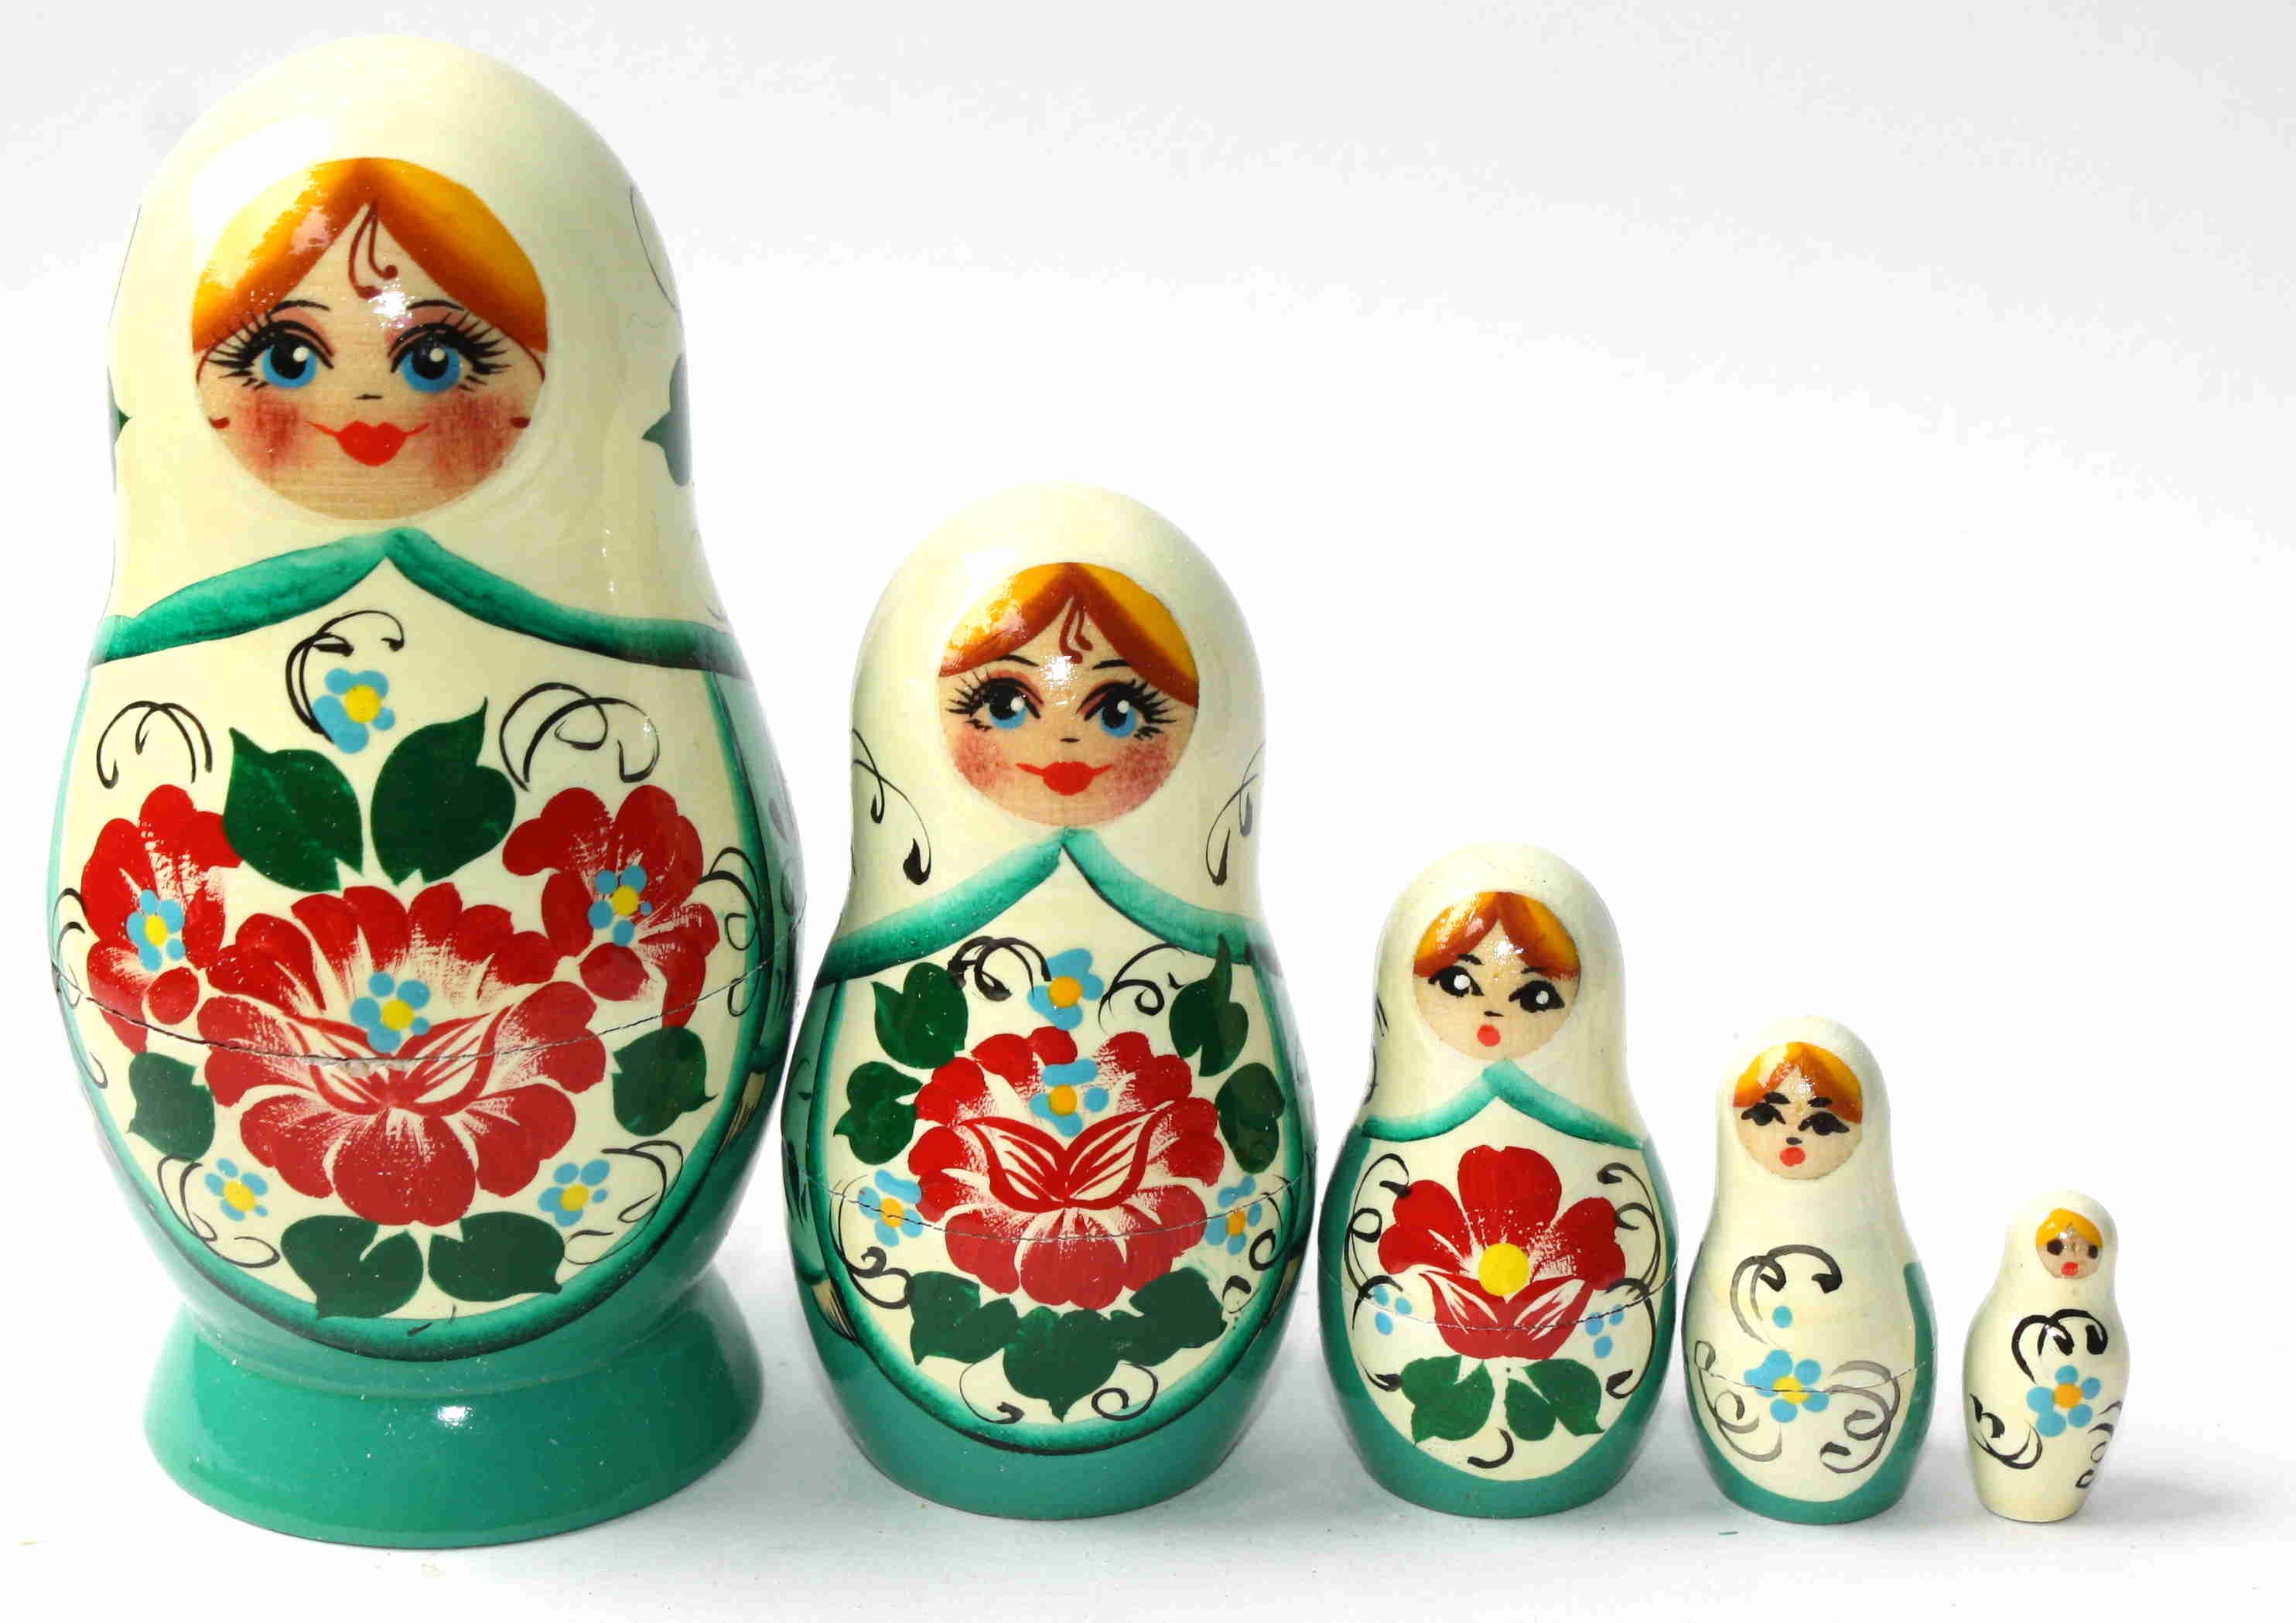 Artists Matryoshka green with White Scarf and red flowers (5 nested set)